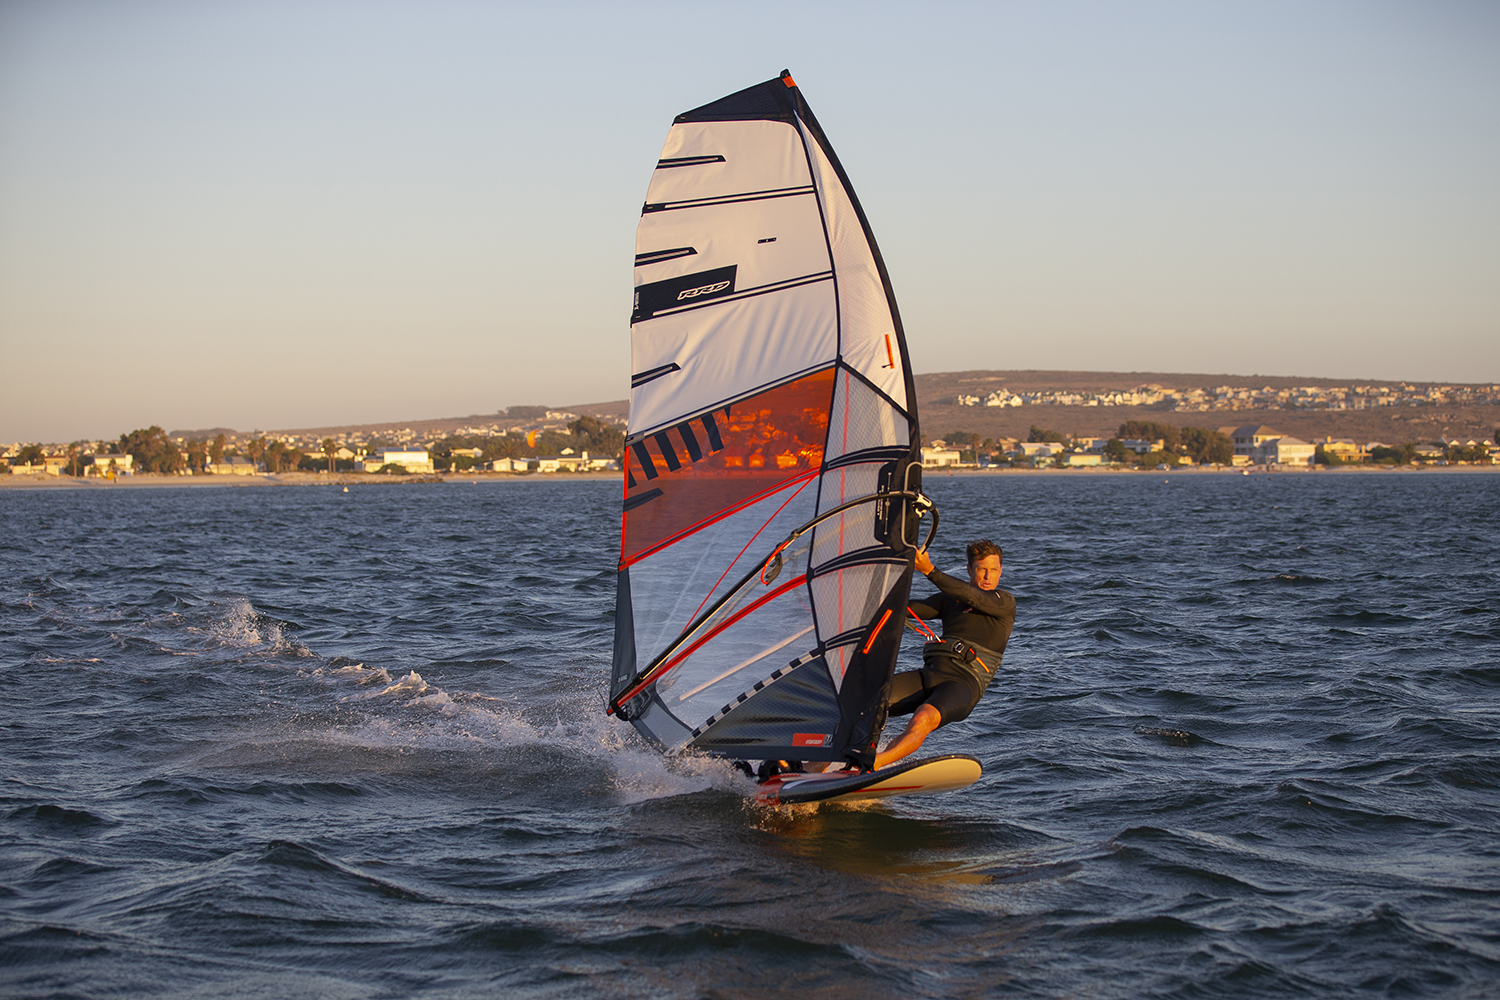 Slalom action in South Africa